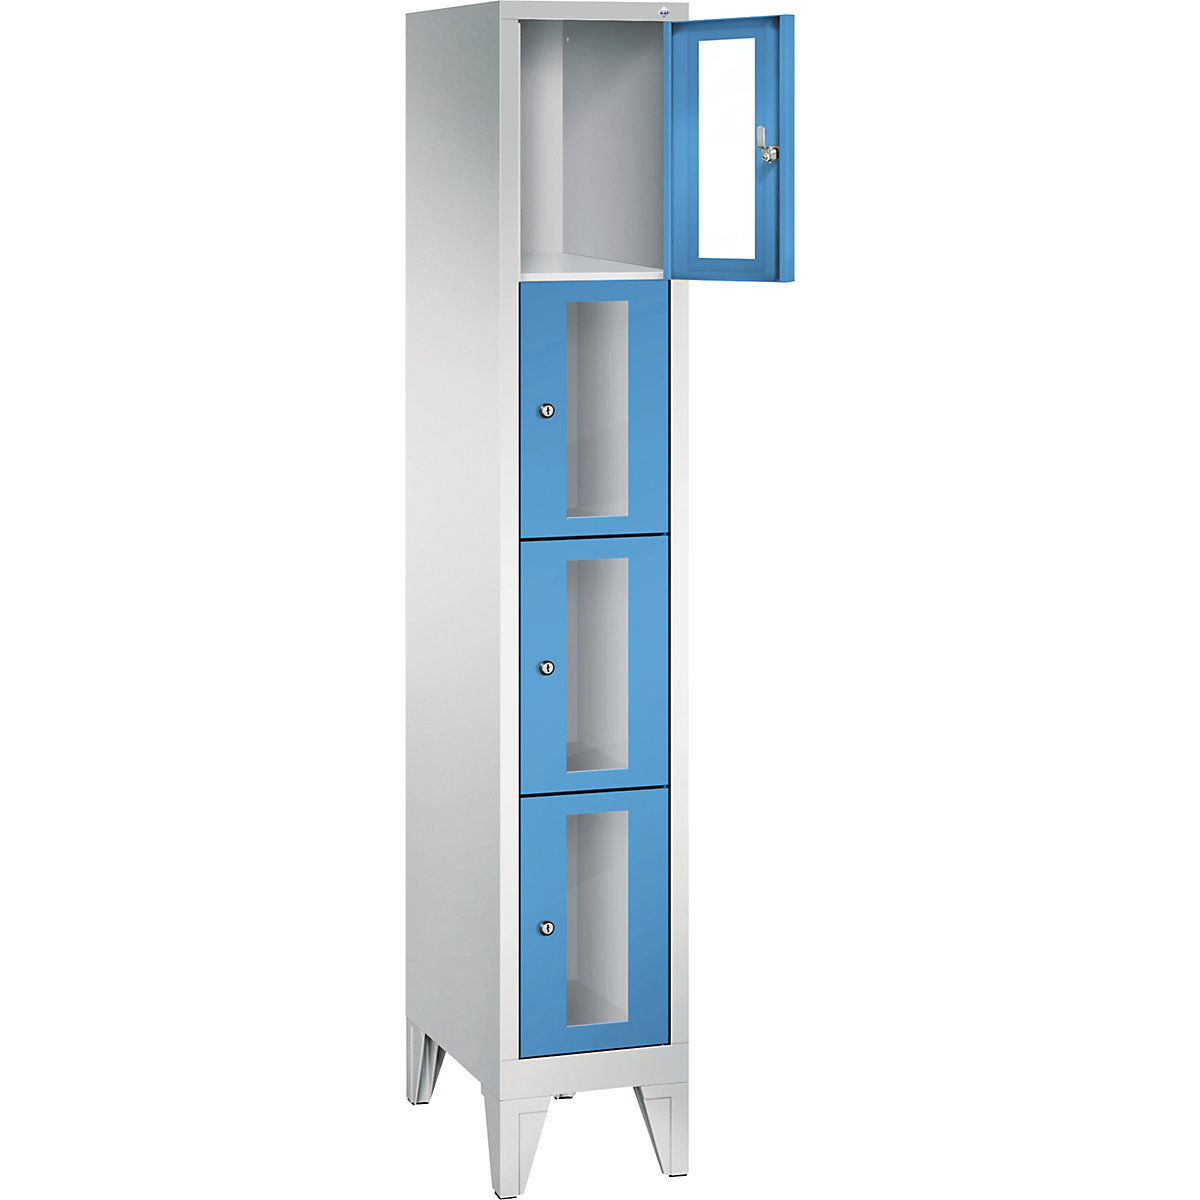 C+P – CLASSIC locker unit, compartment height 375 mm, with feet, 4 compartments, width 320 mm, light blue door